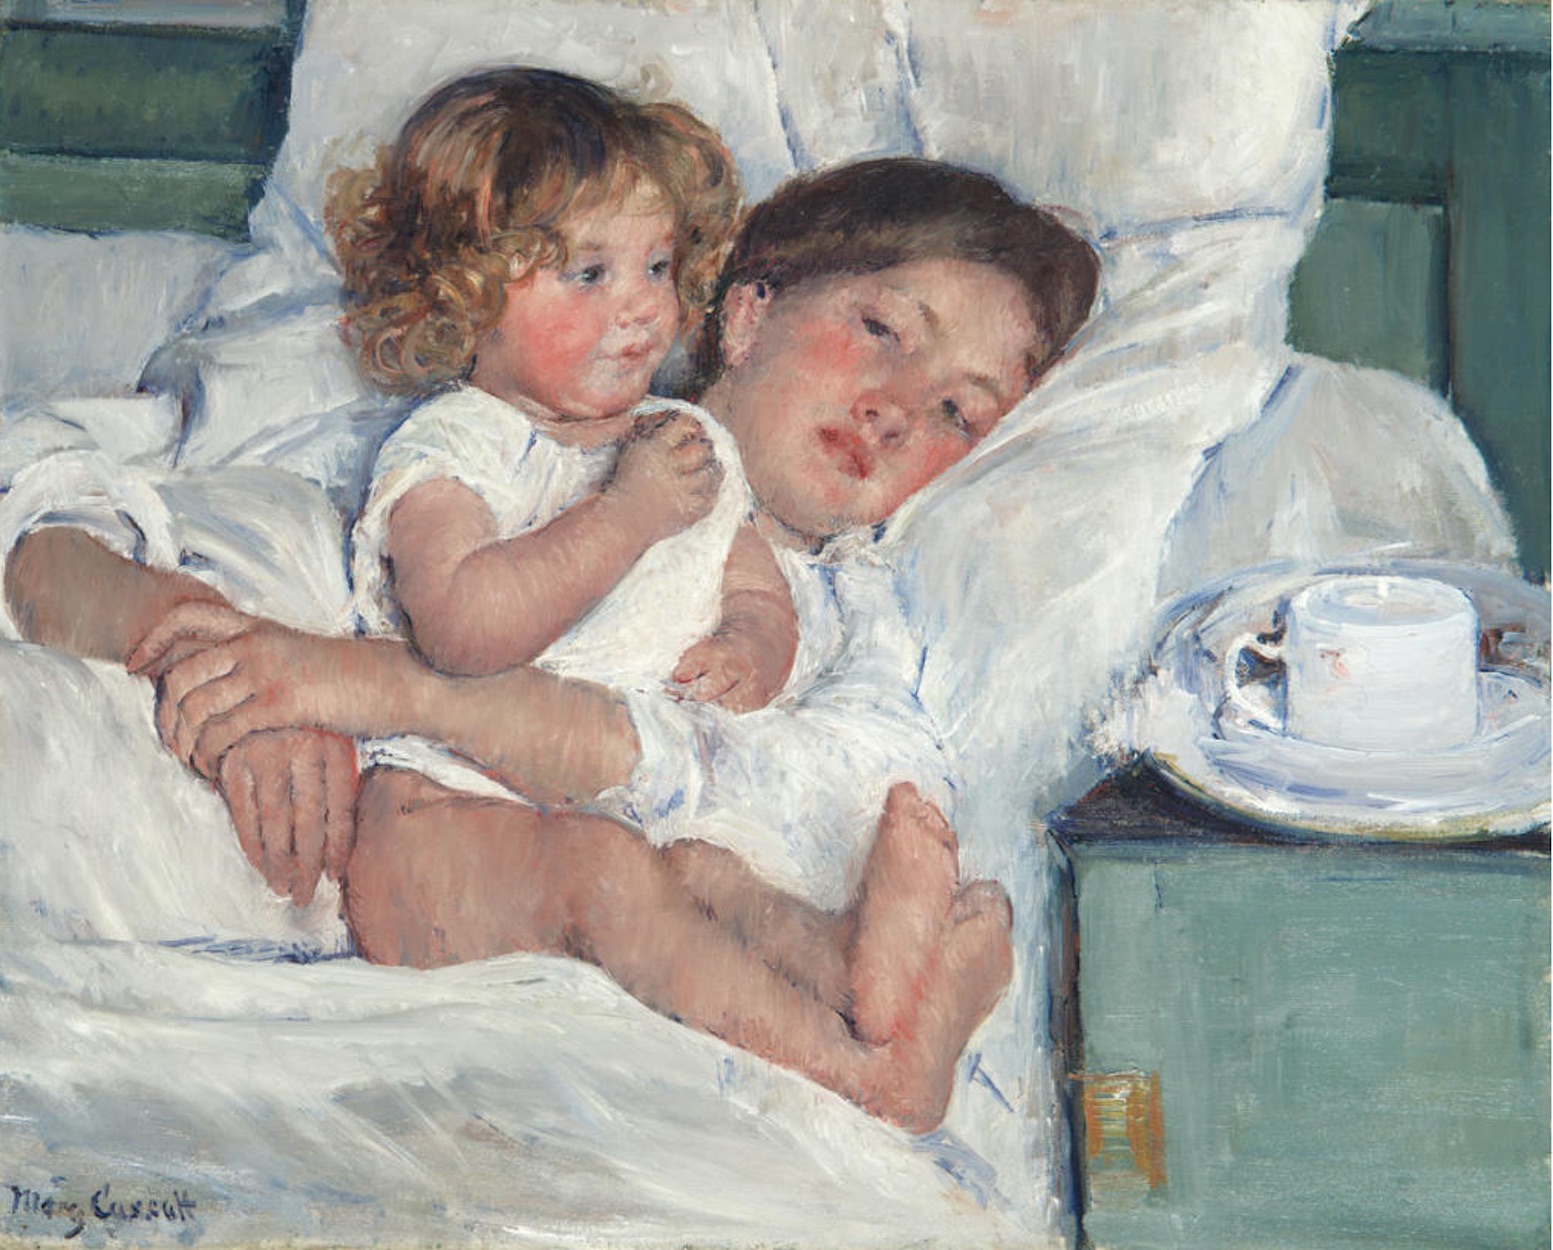 Breakfast in Bed by Mary Cassatt - 1897 - 58.4 x 73.7 cm The Huntington Library, Art Collections and Botanical Gardens